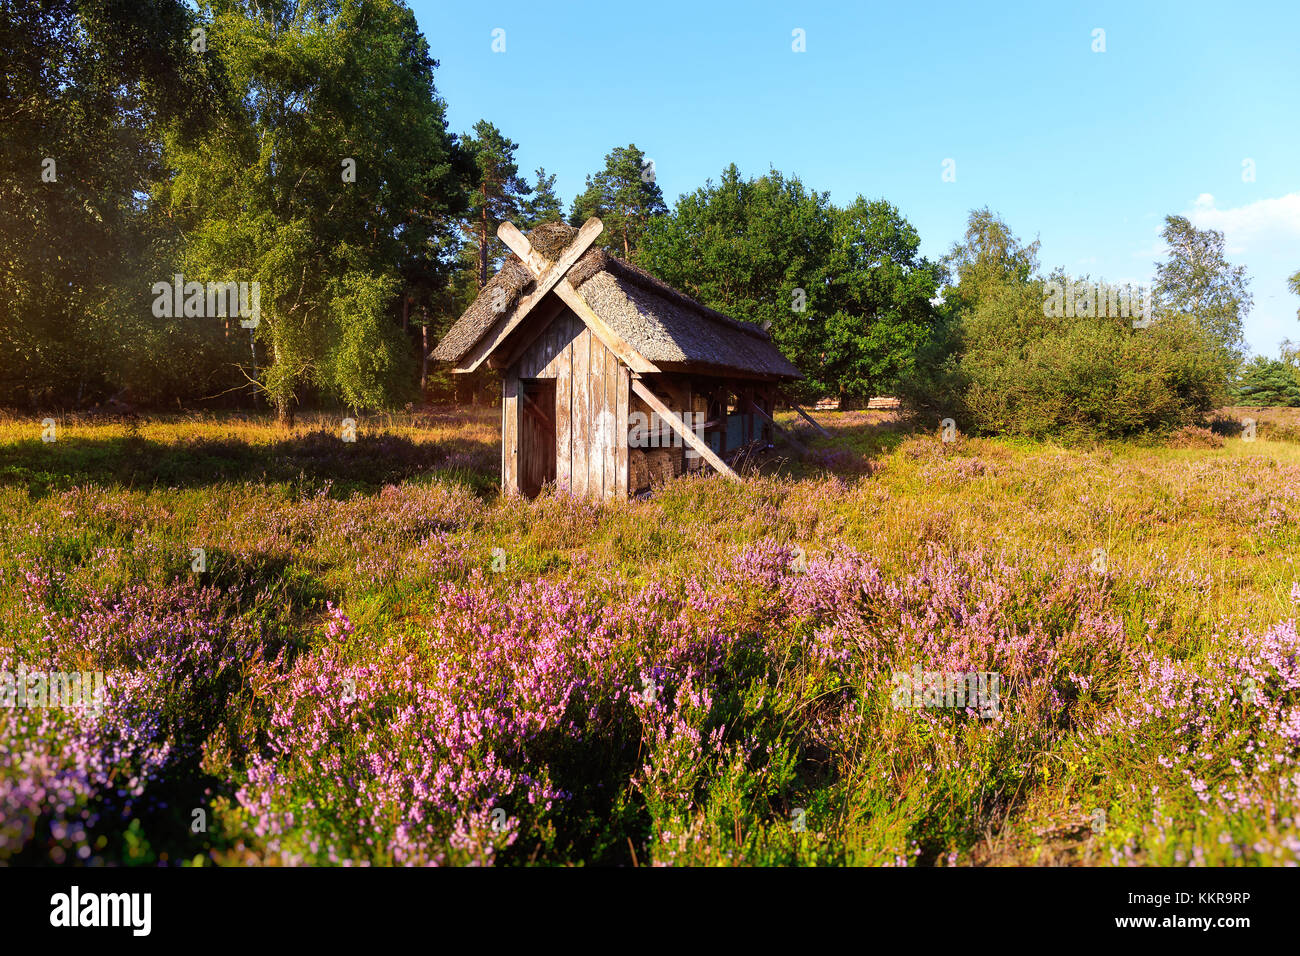 Luneburg Heath is a large area of heath, geest and woodland in the northeastern part of the state of Lower Saxony in northern Germany. Stock Photo